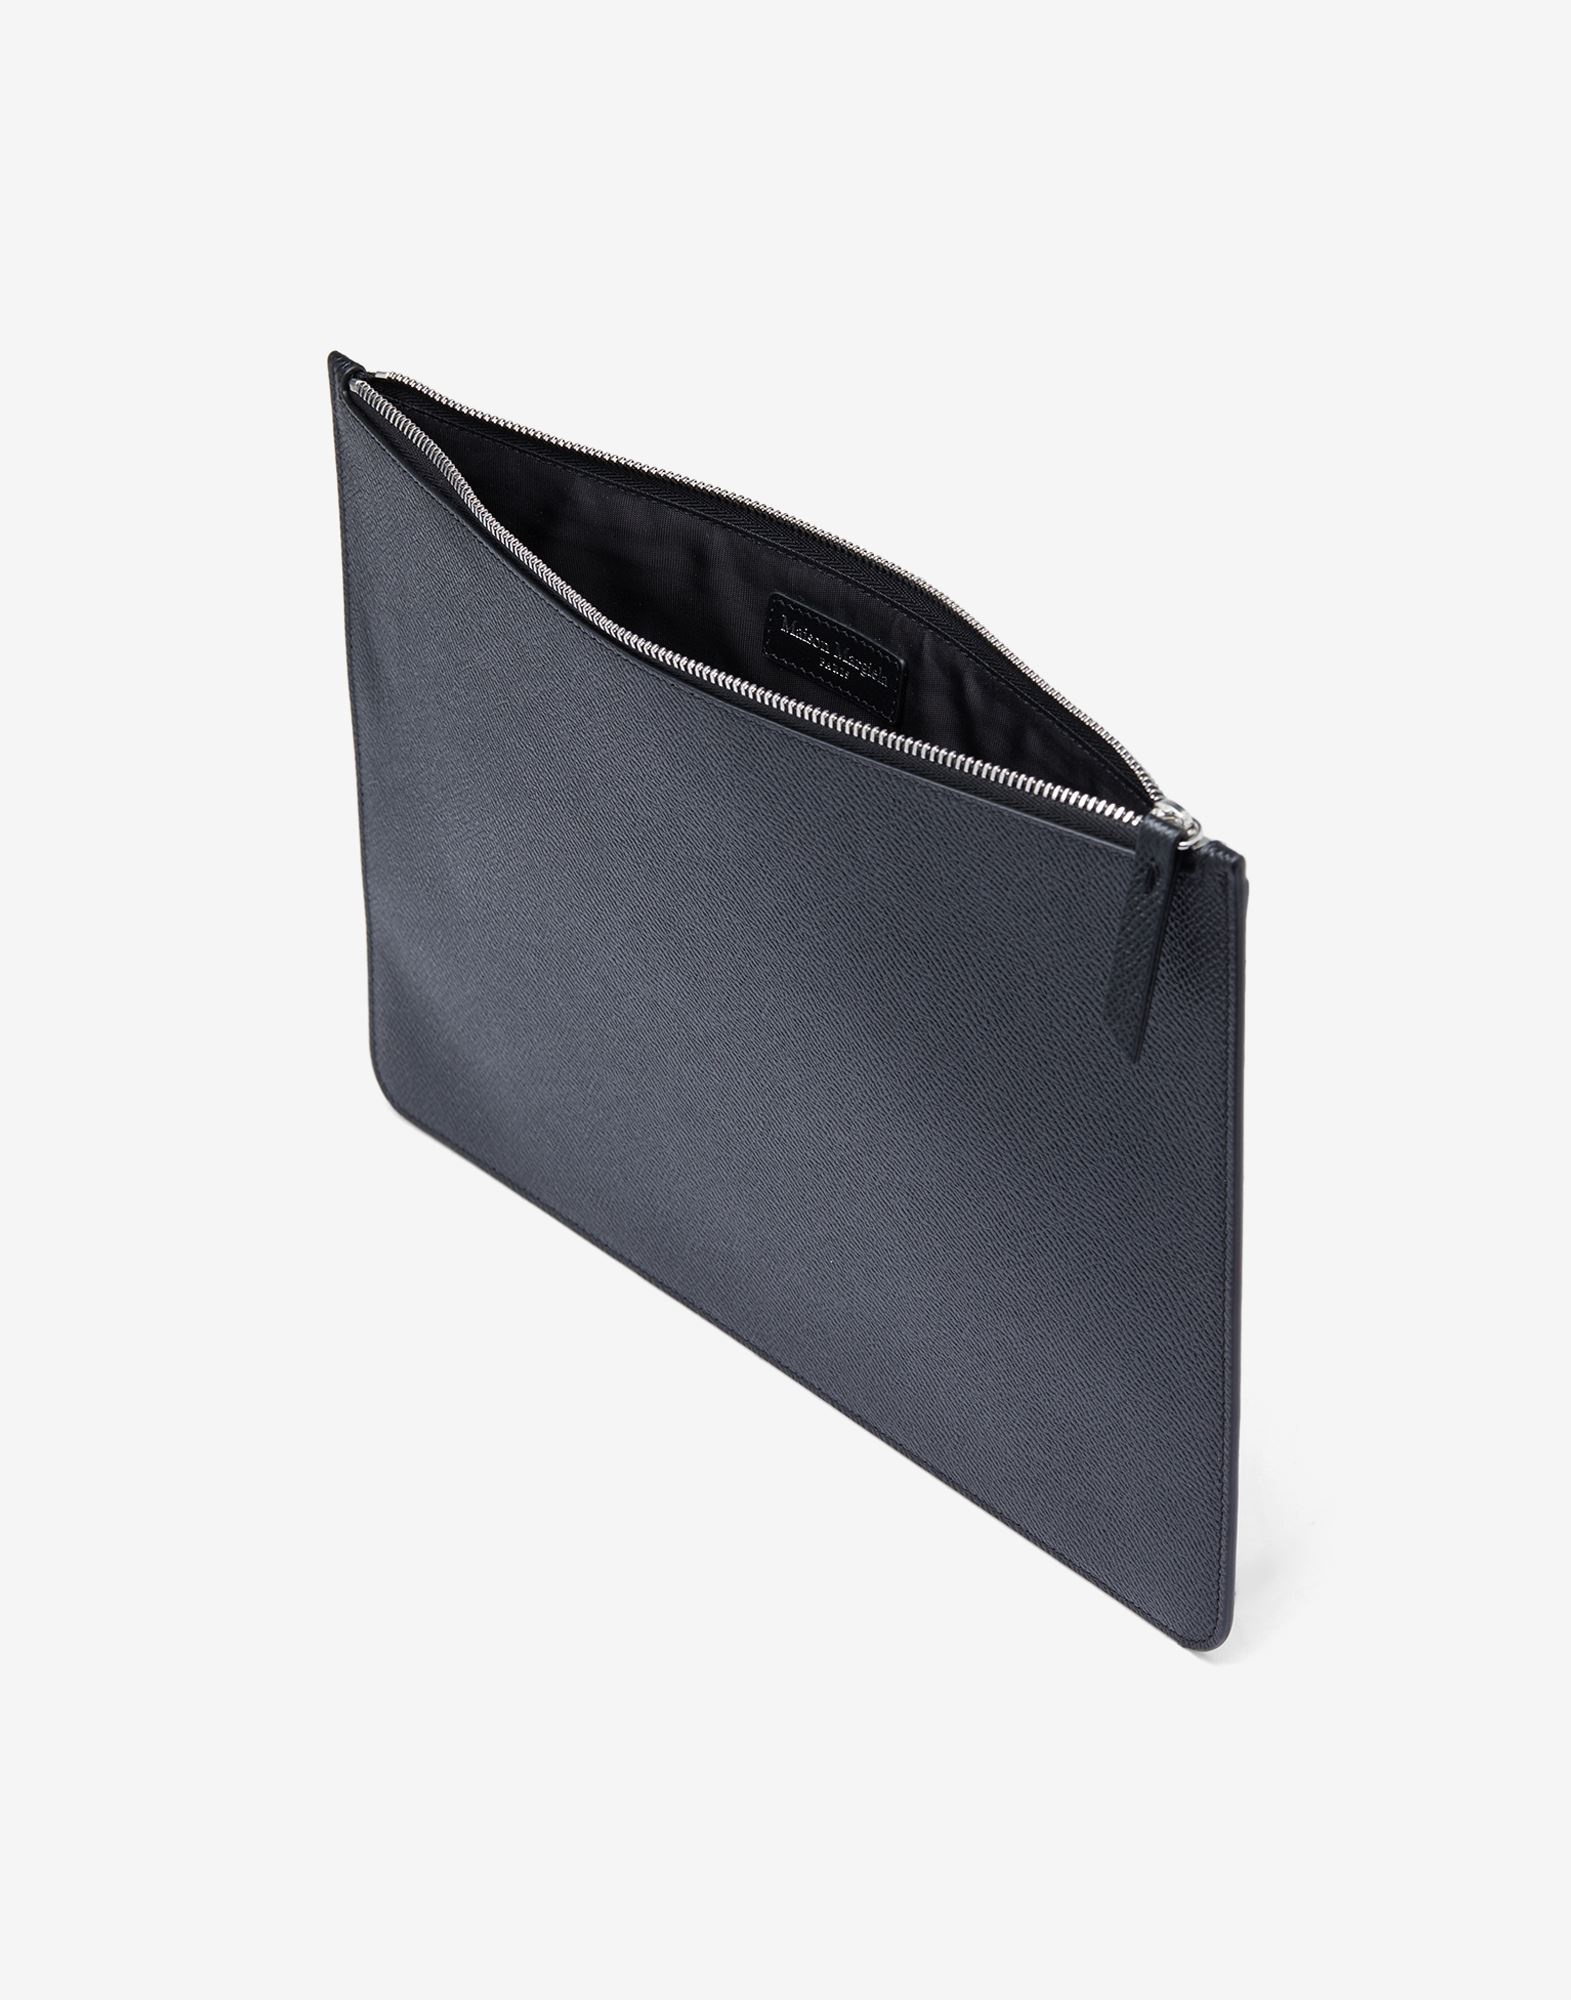 Large pouch - 3